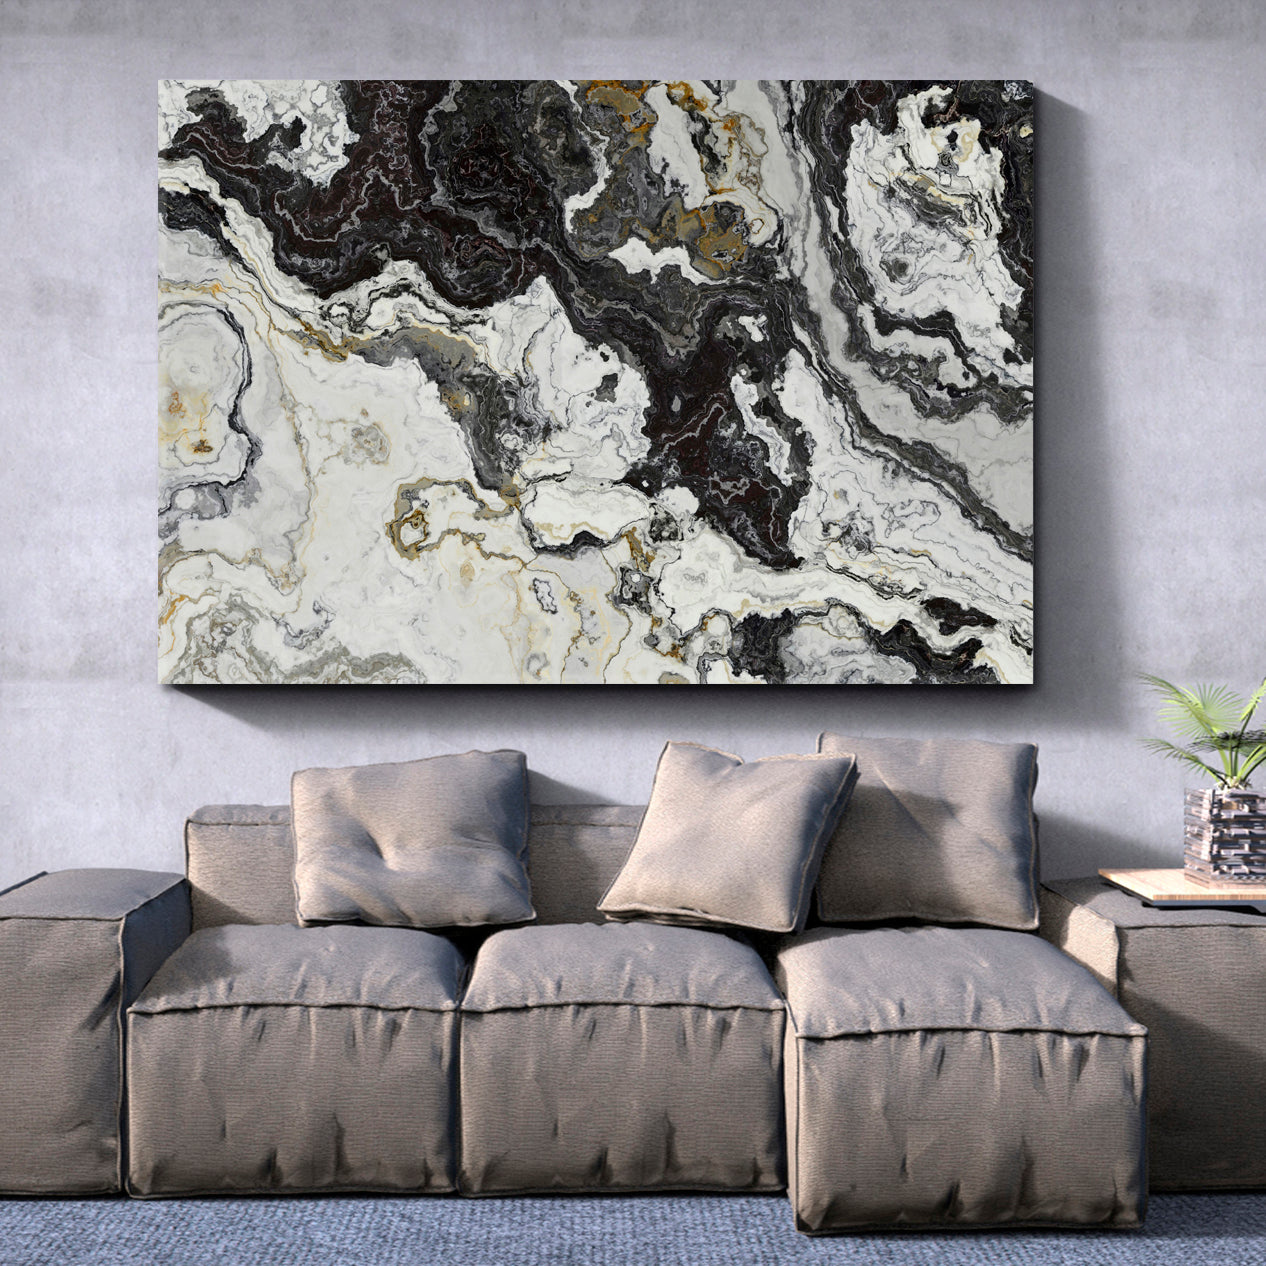 Black White Marble Pattern Curly Grey Veins Abstract Marble Oriental Art Print Canvas Artesty 1 panel 24" x 16" 